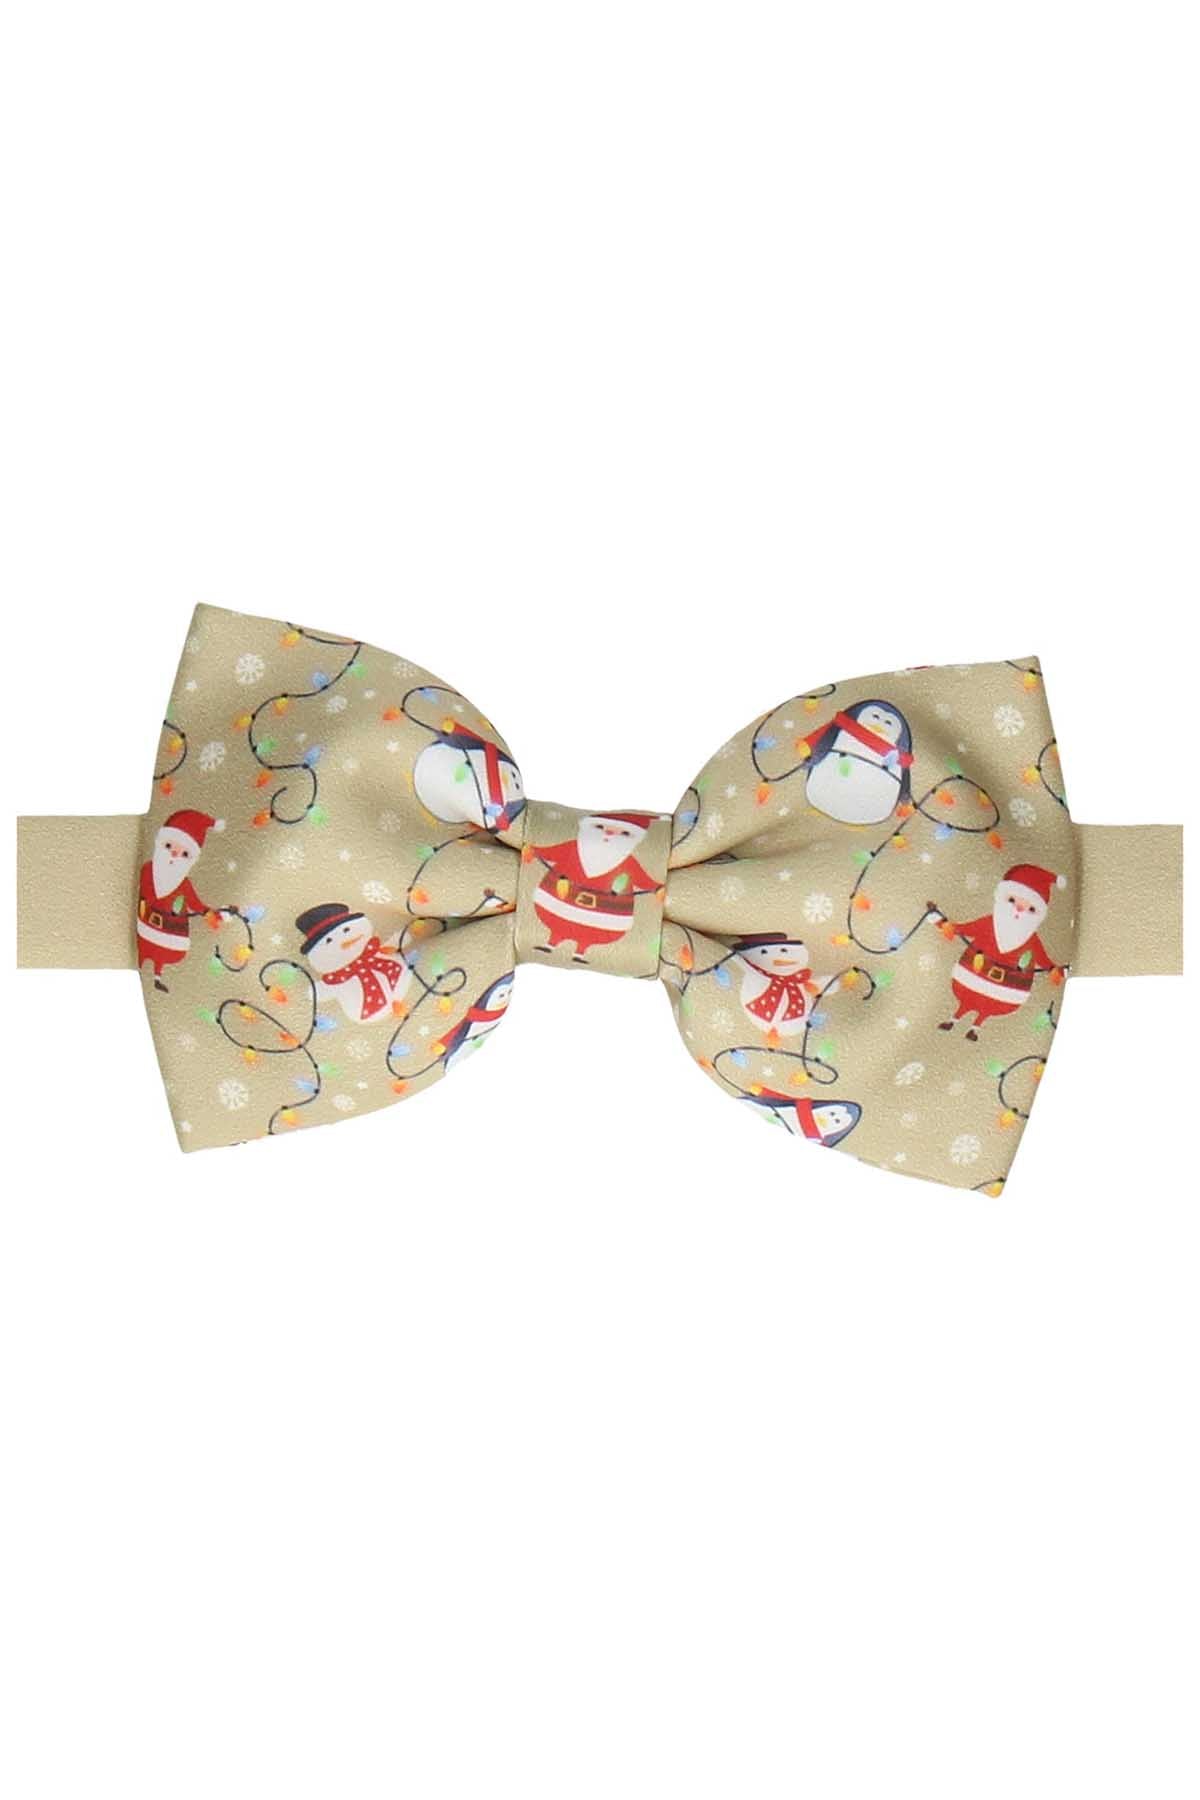 Mrs. Bow Tie Gold Christmas Ready-Tied Bow Tie